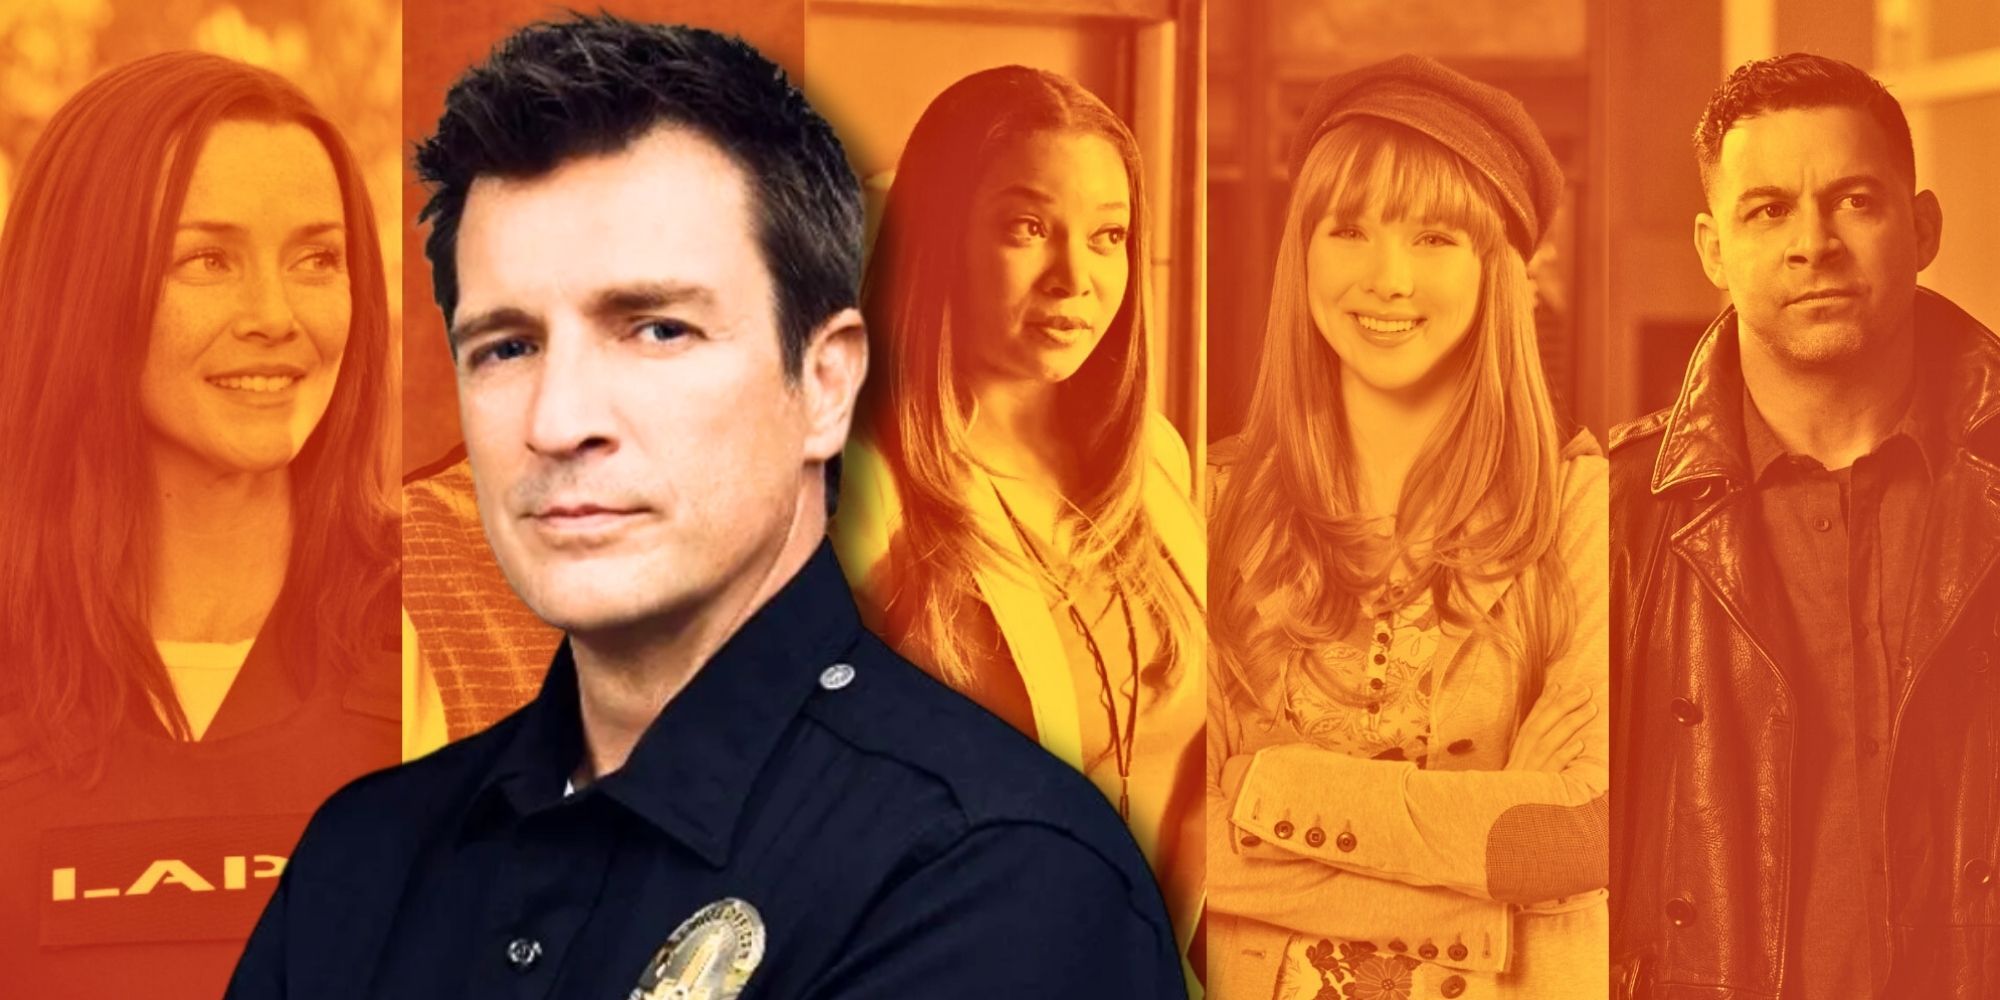 Composite image of Nathan Fillion in front of his co-stars